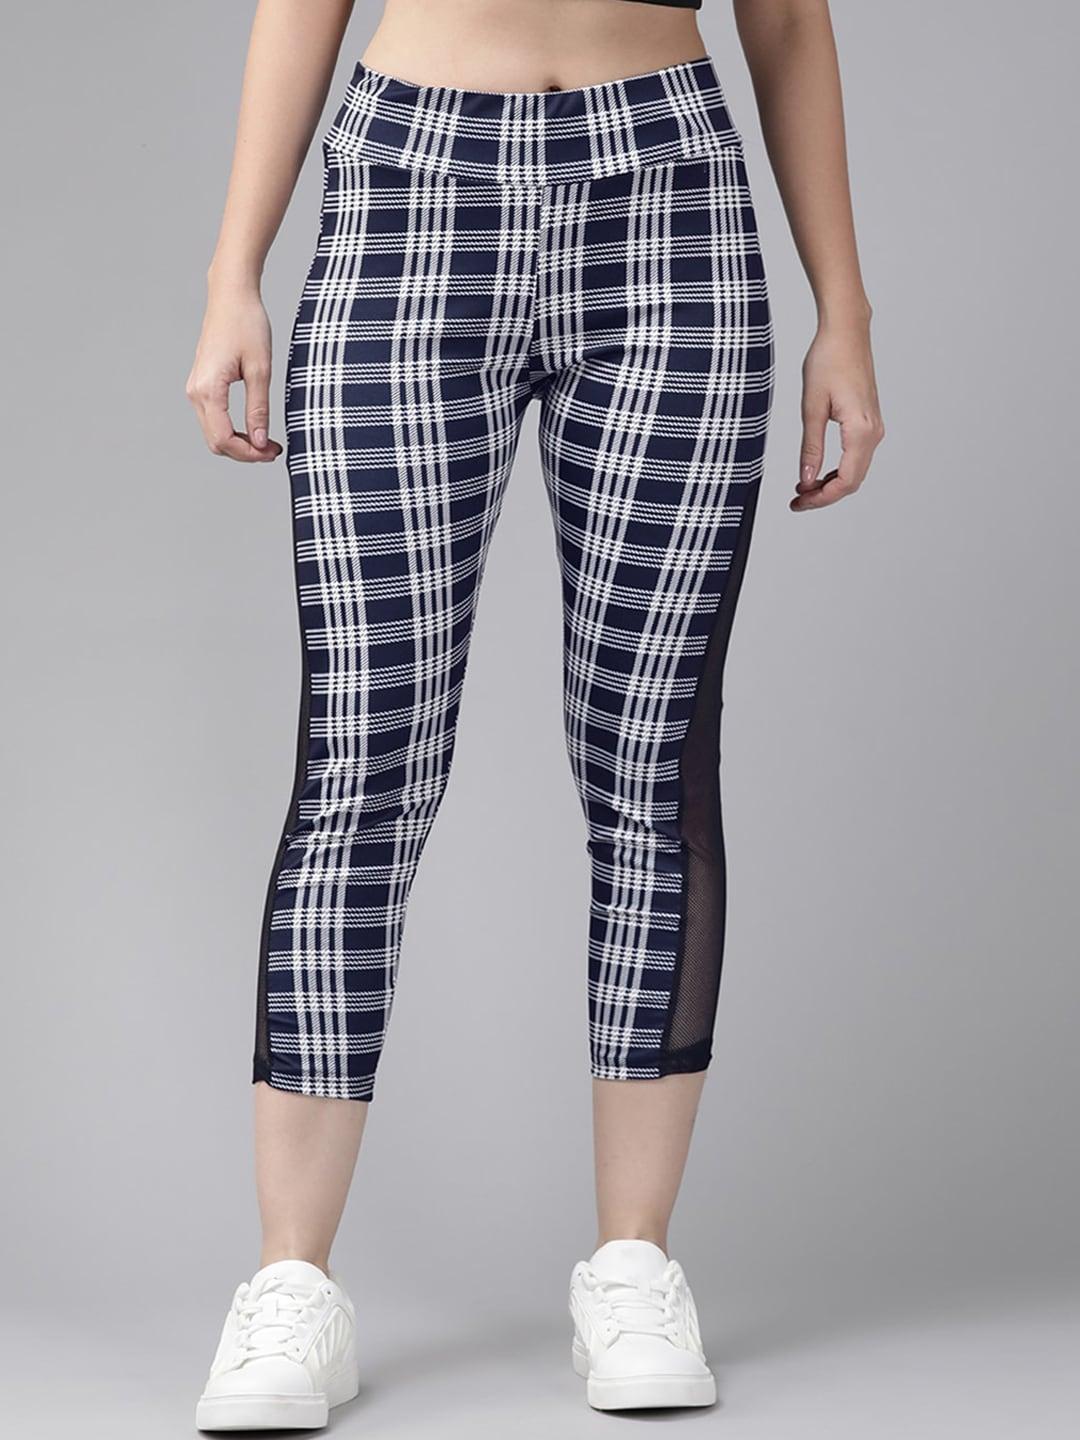 baesd women relaxed fit checkered capri